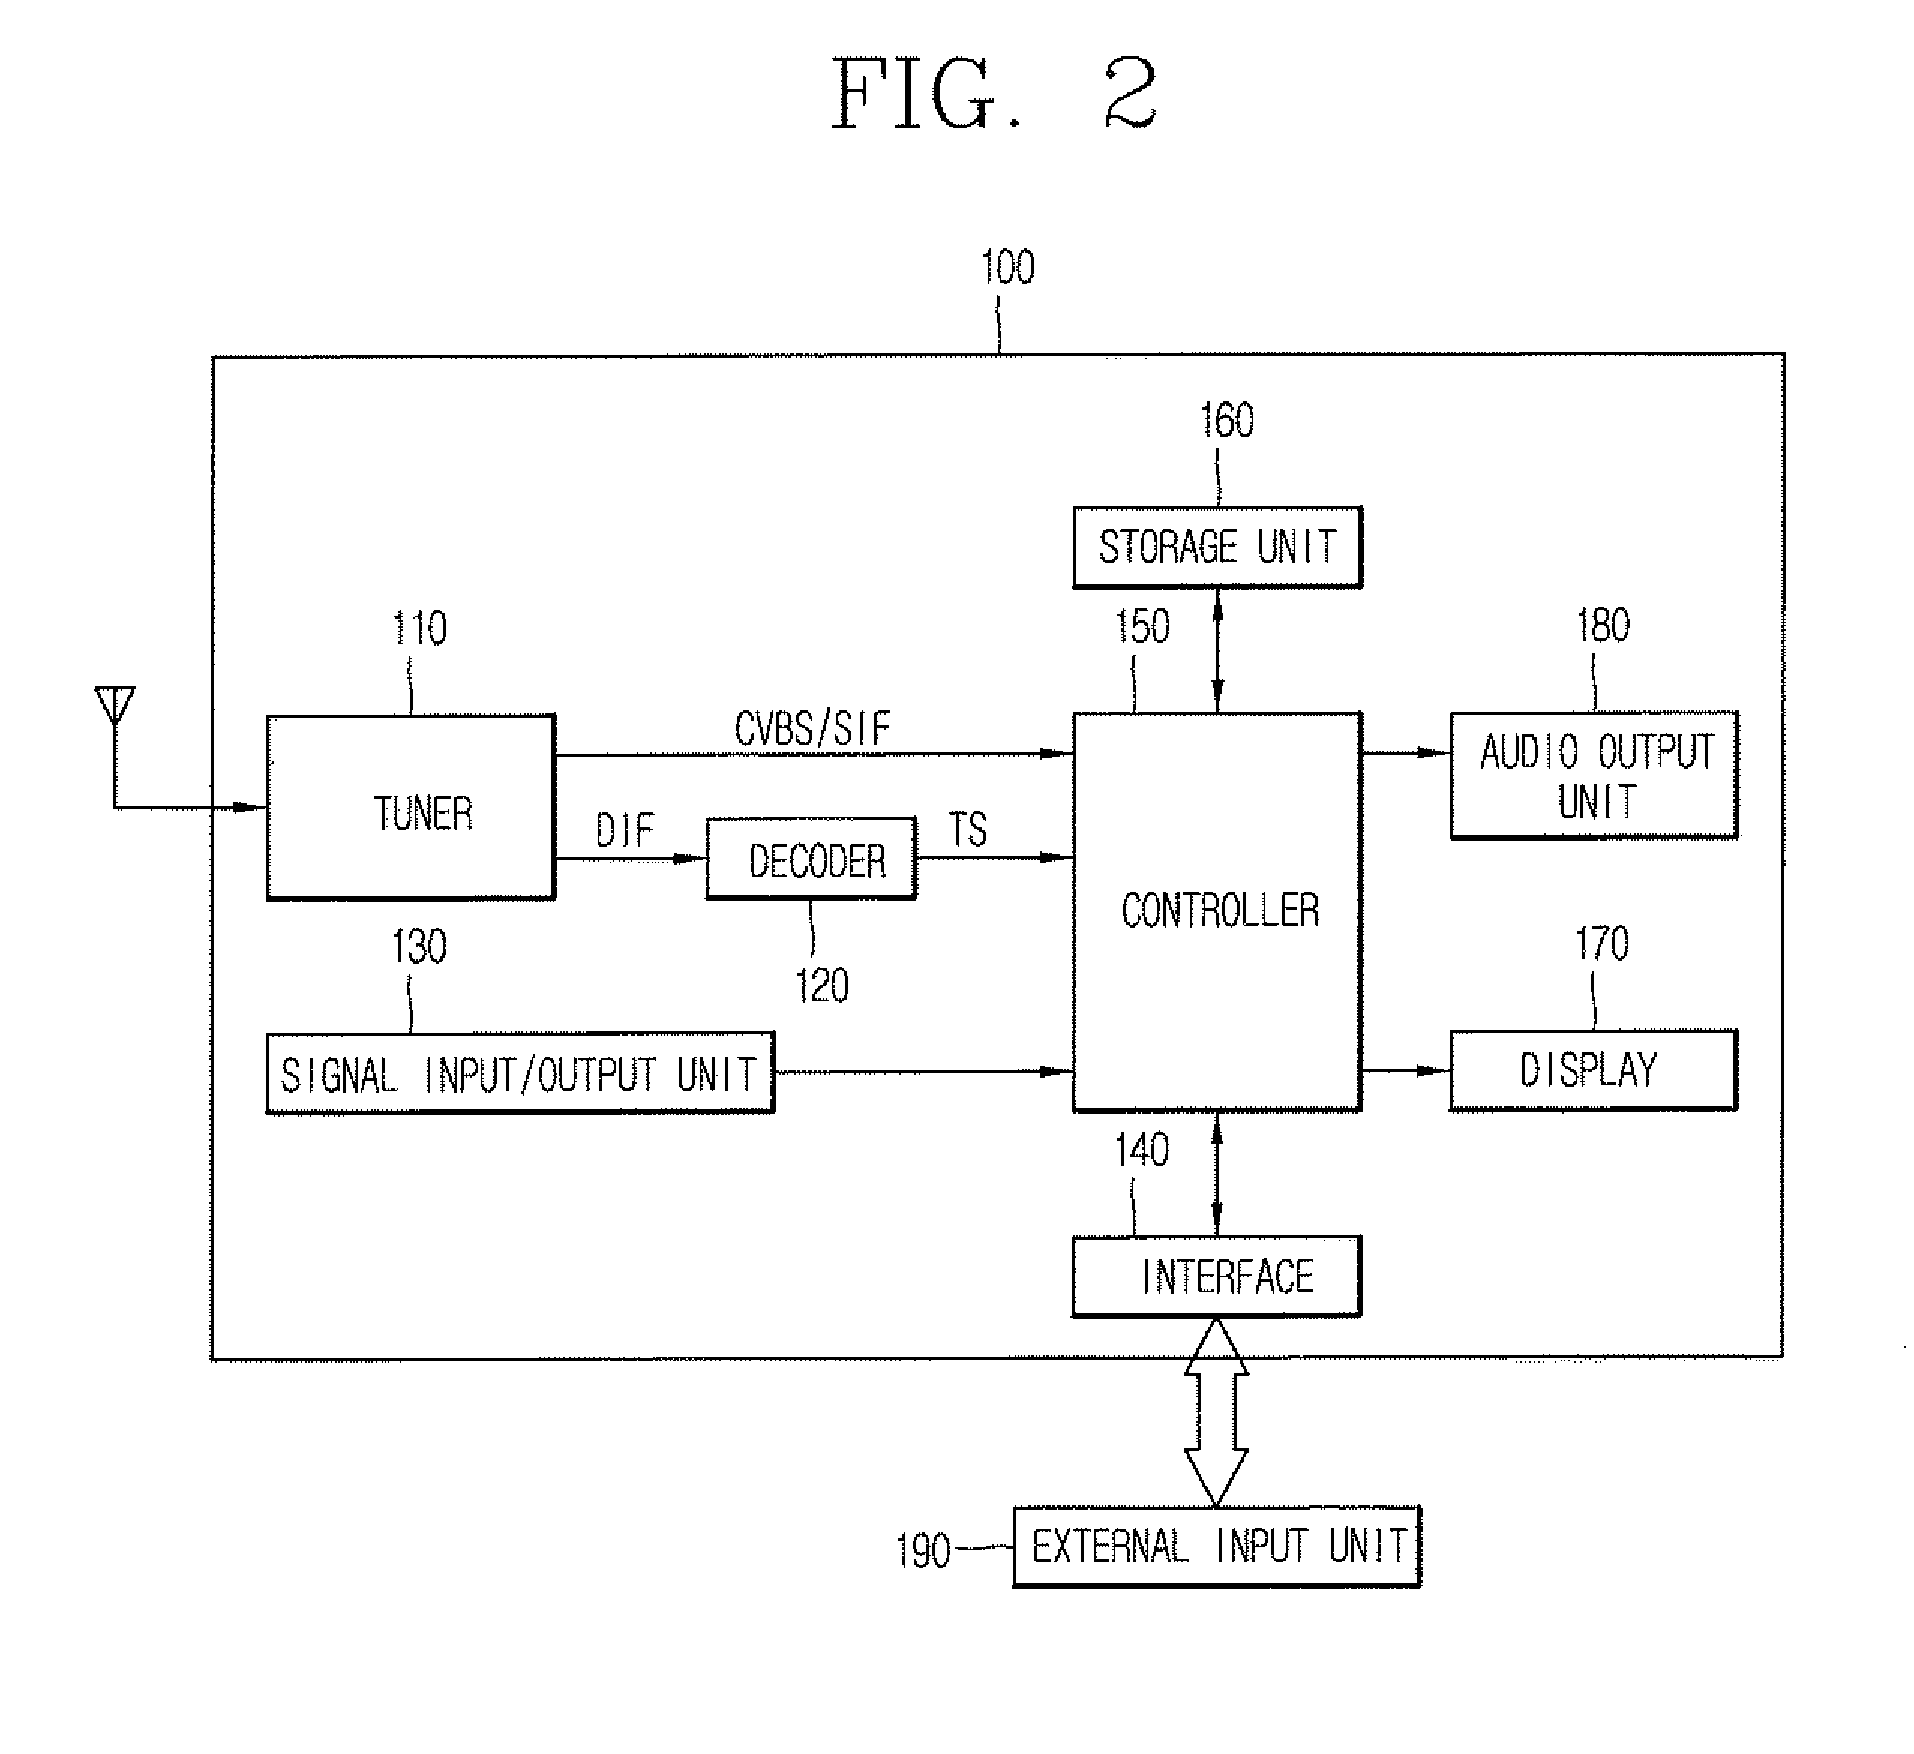 Image display apparatus and method of controlling the same